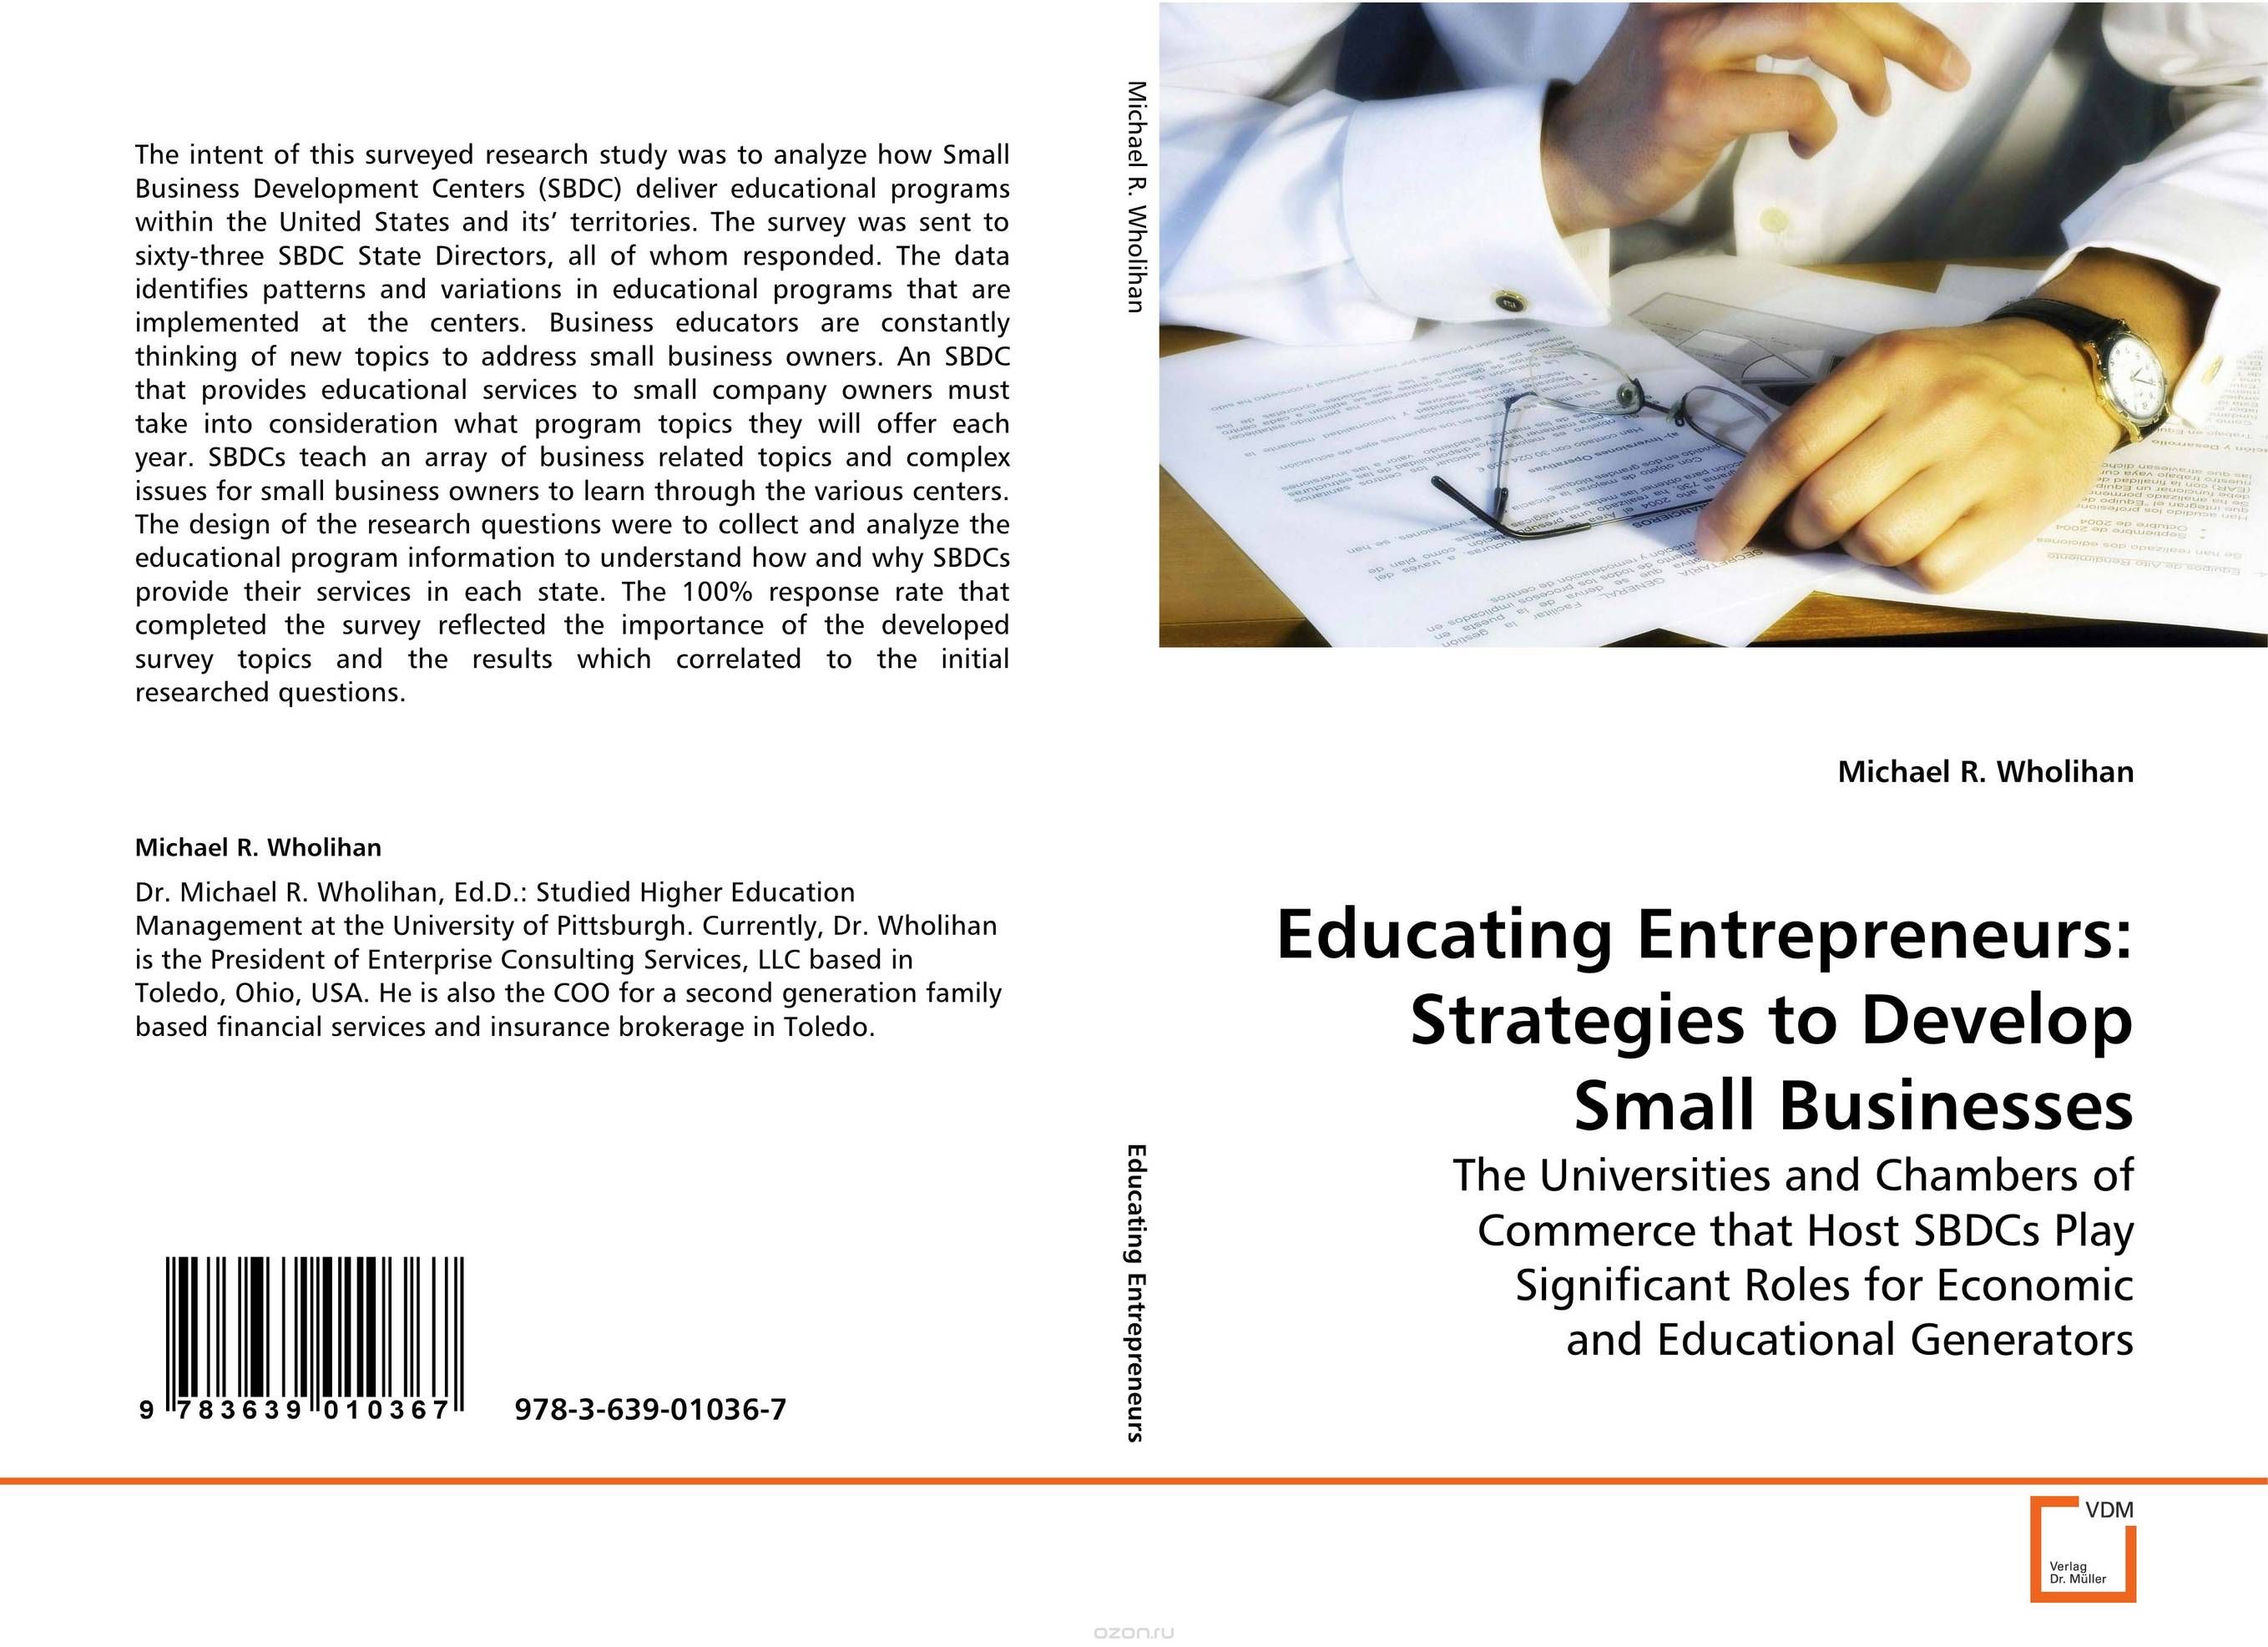 Educating Entrepreneurs: Strategies to Develop Small Businesses